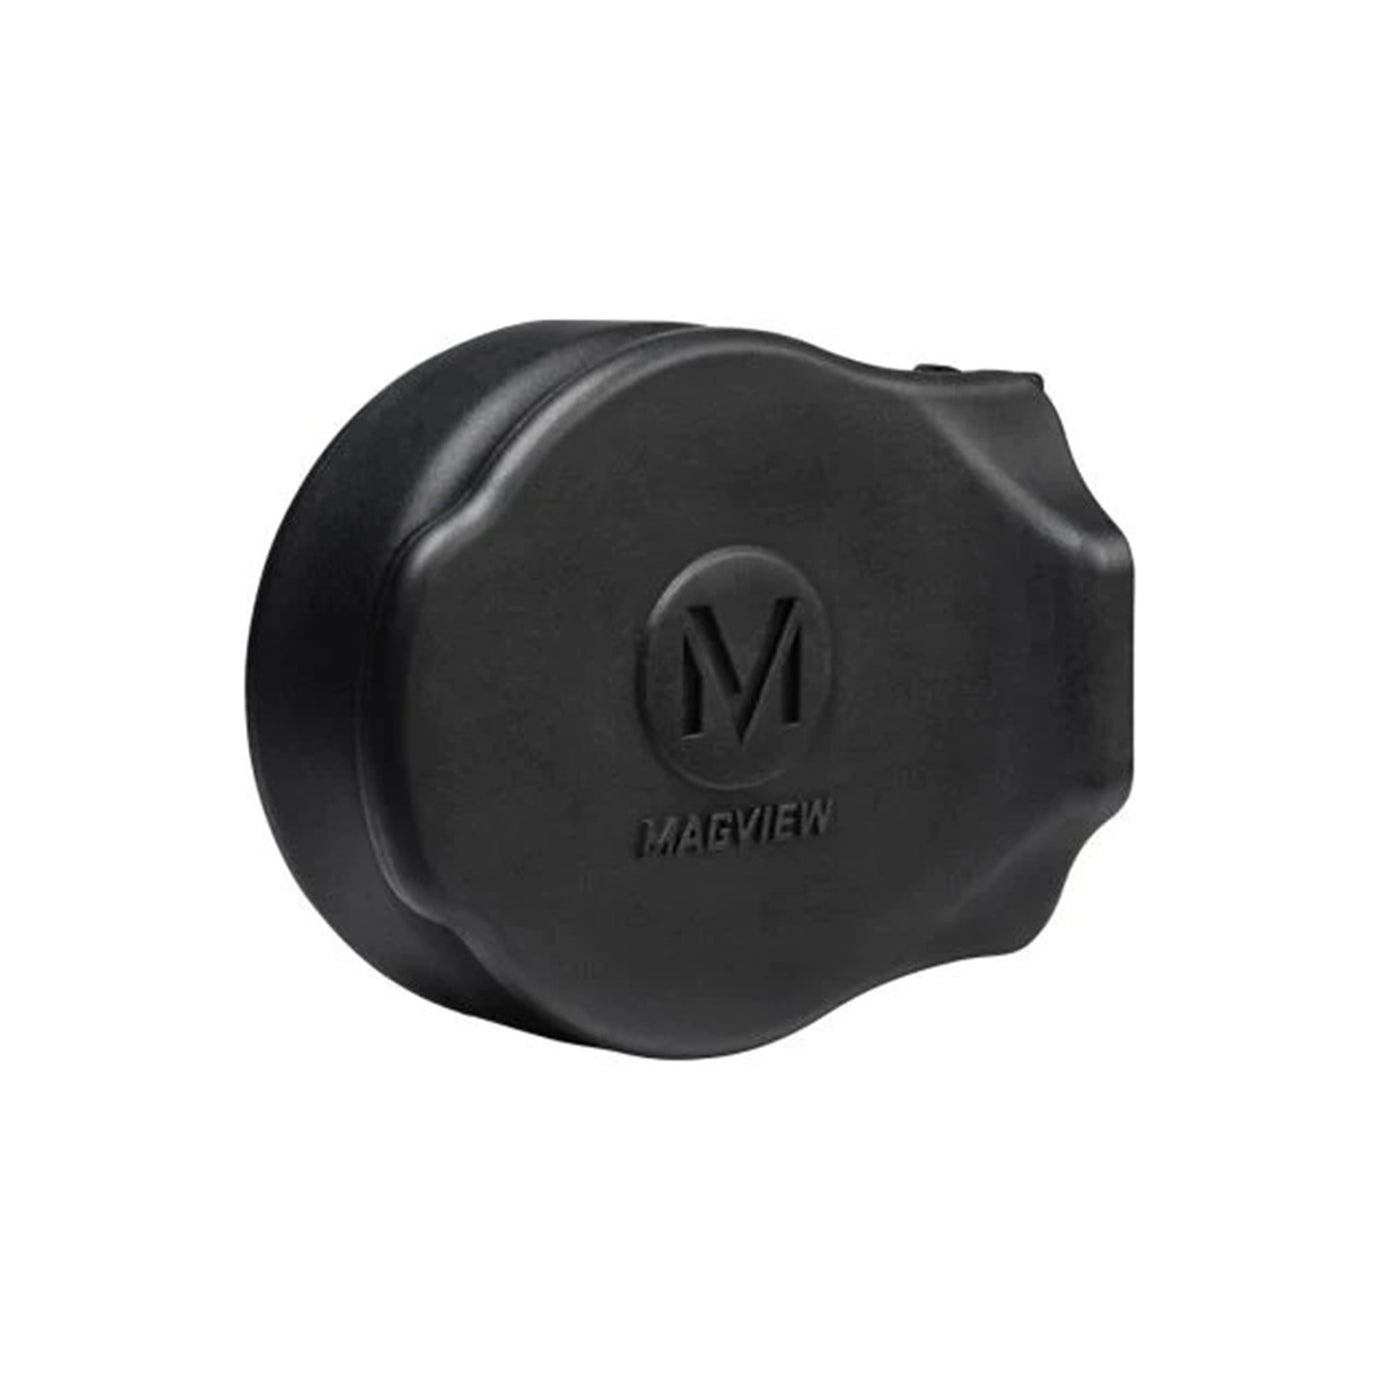 MAGVIEW Spotting Scope Phone Adapter